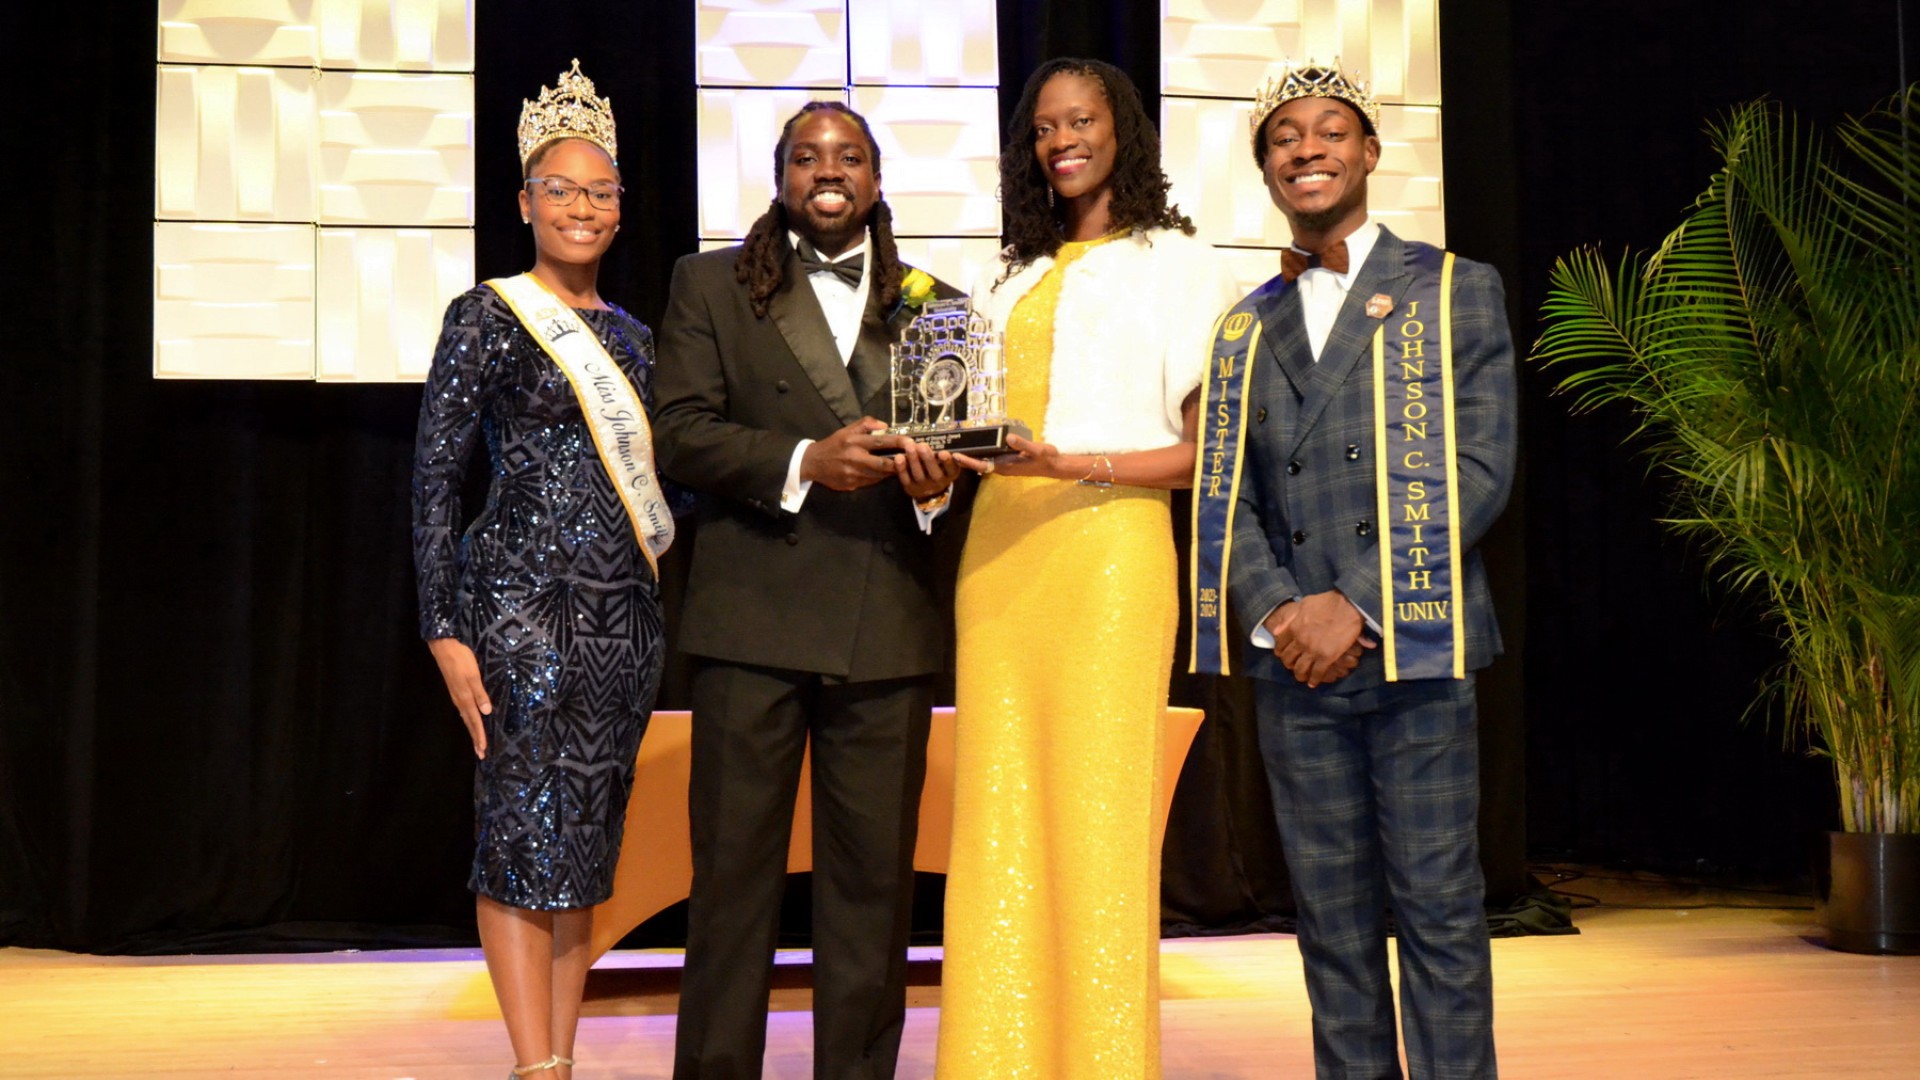 Bernard Smith, Jr. ’17 was presented with the Arch of Triumph Award.